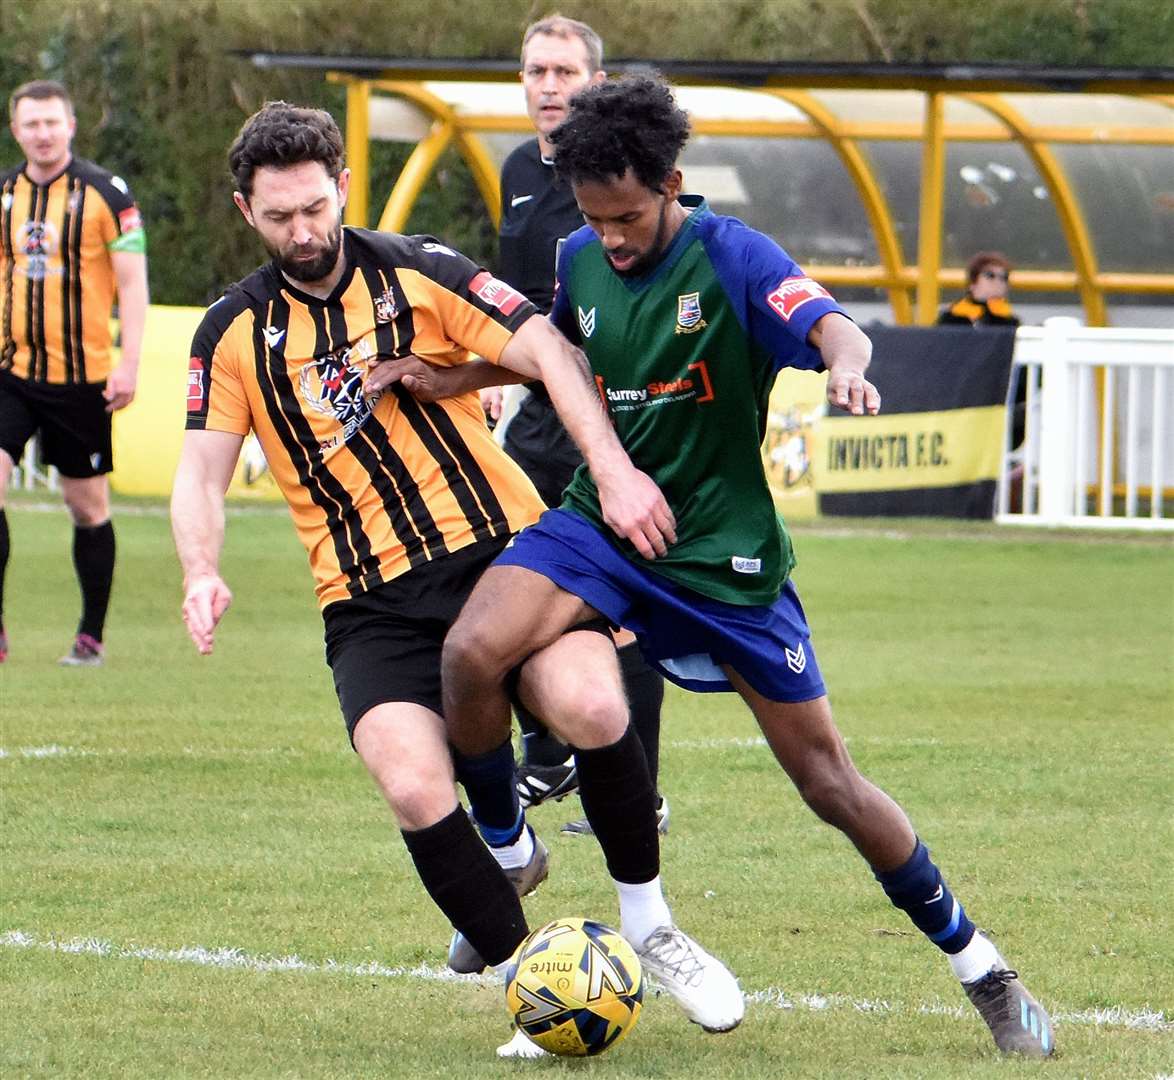 On-loan Folkestone midfielder Dean Rance is closed down by an away player at Cheriton Road. Picture: Randolph File